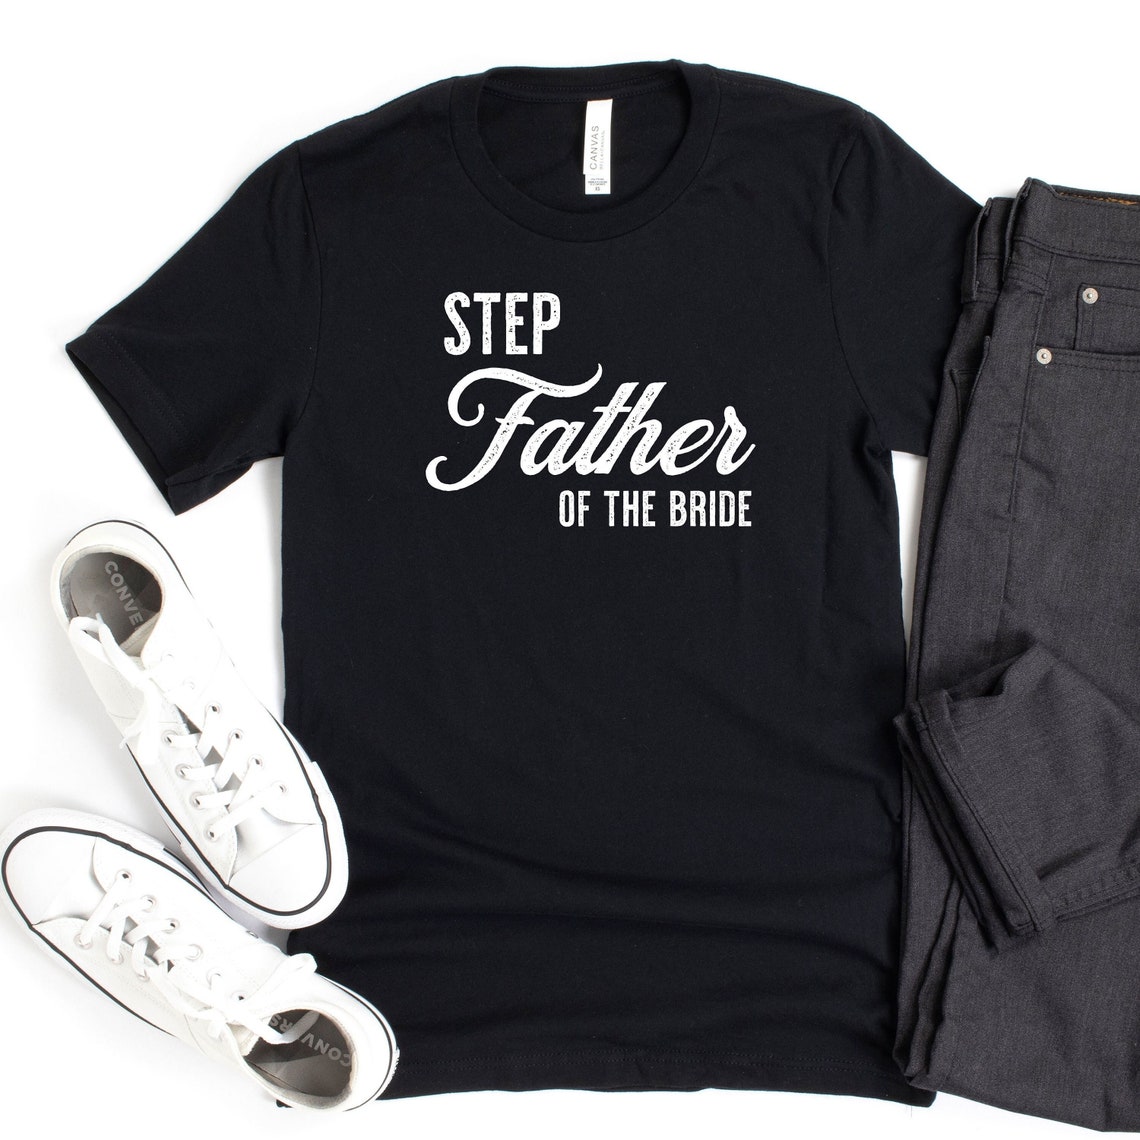 Step Father of the Bride - Vintage Romance